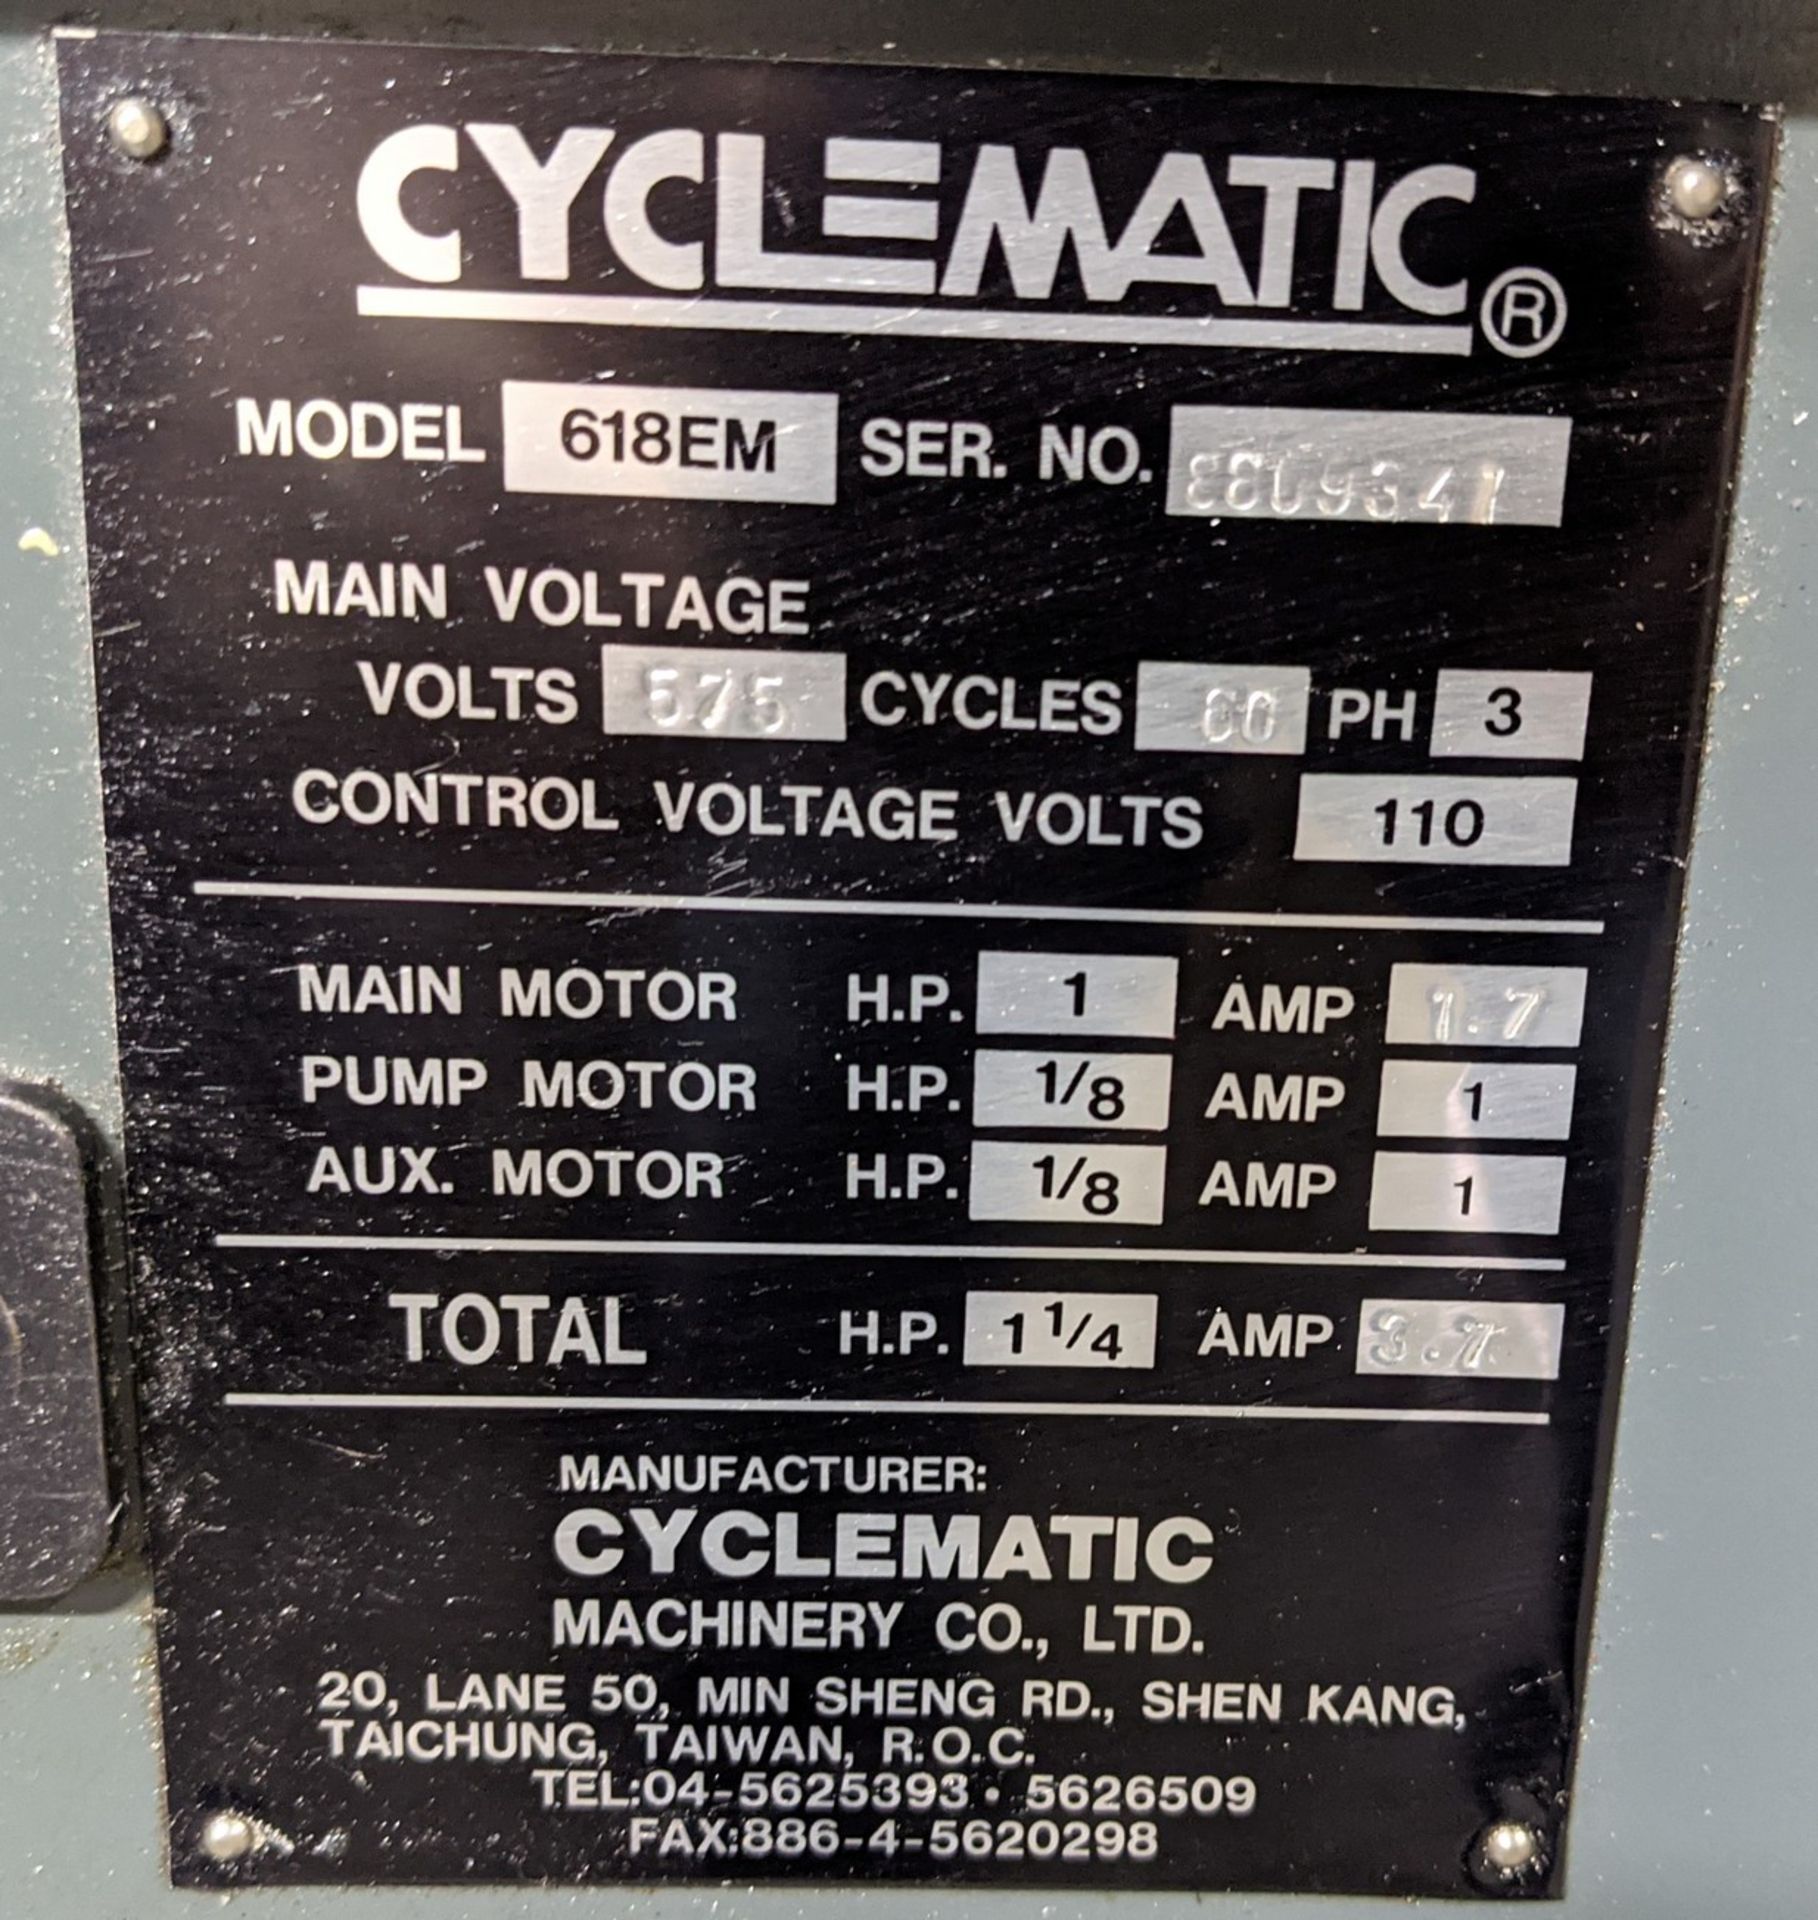 CYCLEMATIC MODEL CLT-618EM TOOL ROOM LATHE, ANILAM WIZARD 450L DRO, 11” SWING, 9" MAX CUT DIA., 18" - Image 13 of 16